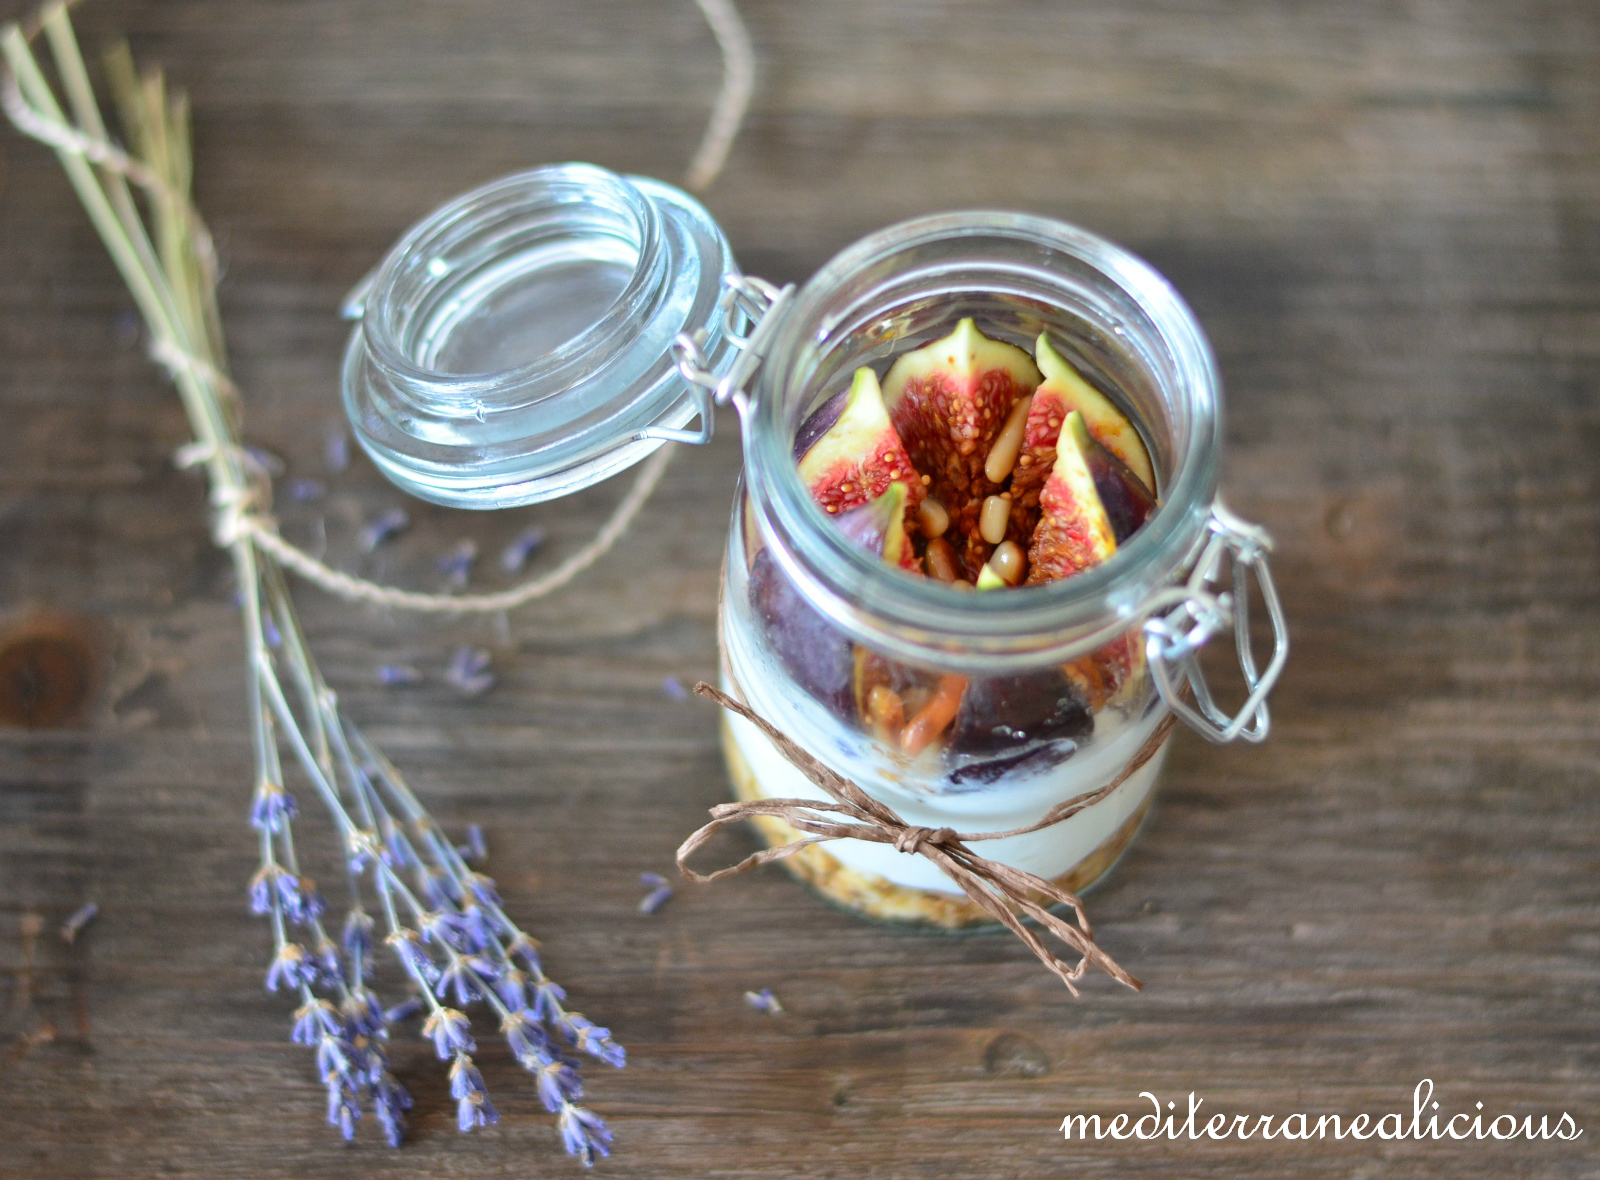 Lavender Honey-Caramelized Figs and Pine Nuts with Yoghurt Cream